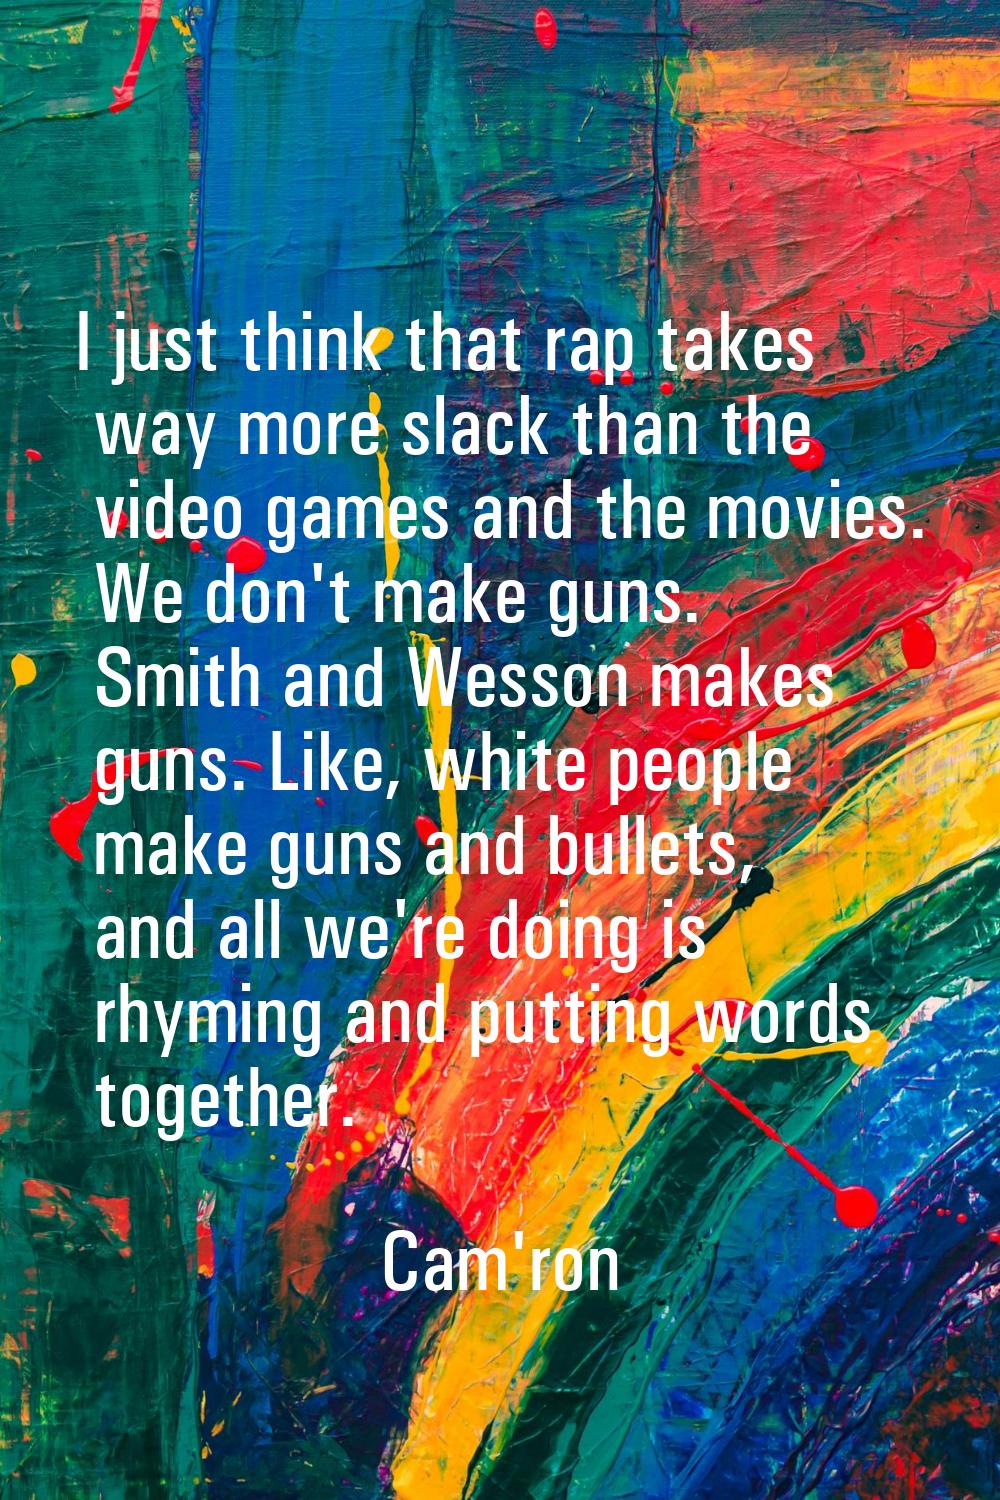 I just think that rap takes way more slack than the video games and the movies. We don't make guns.